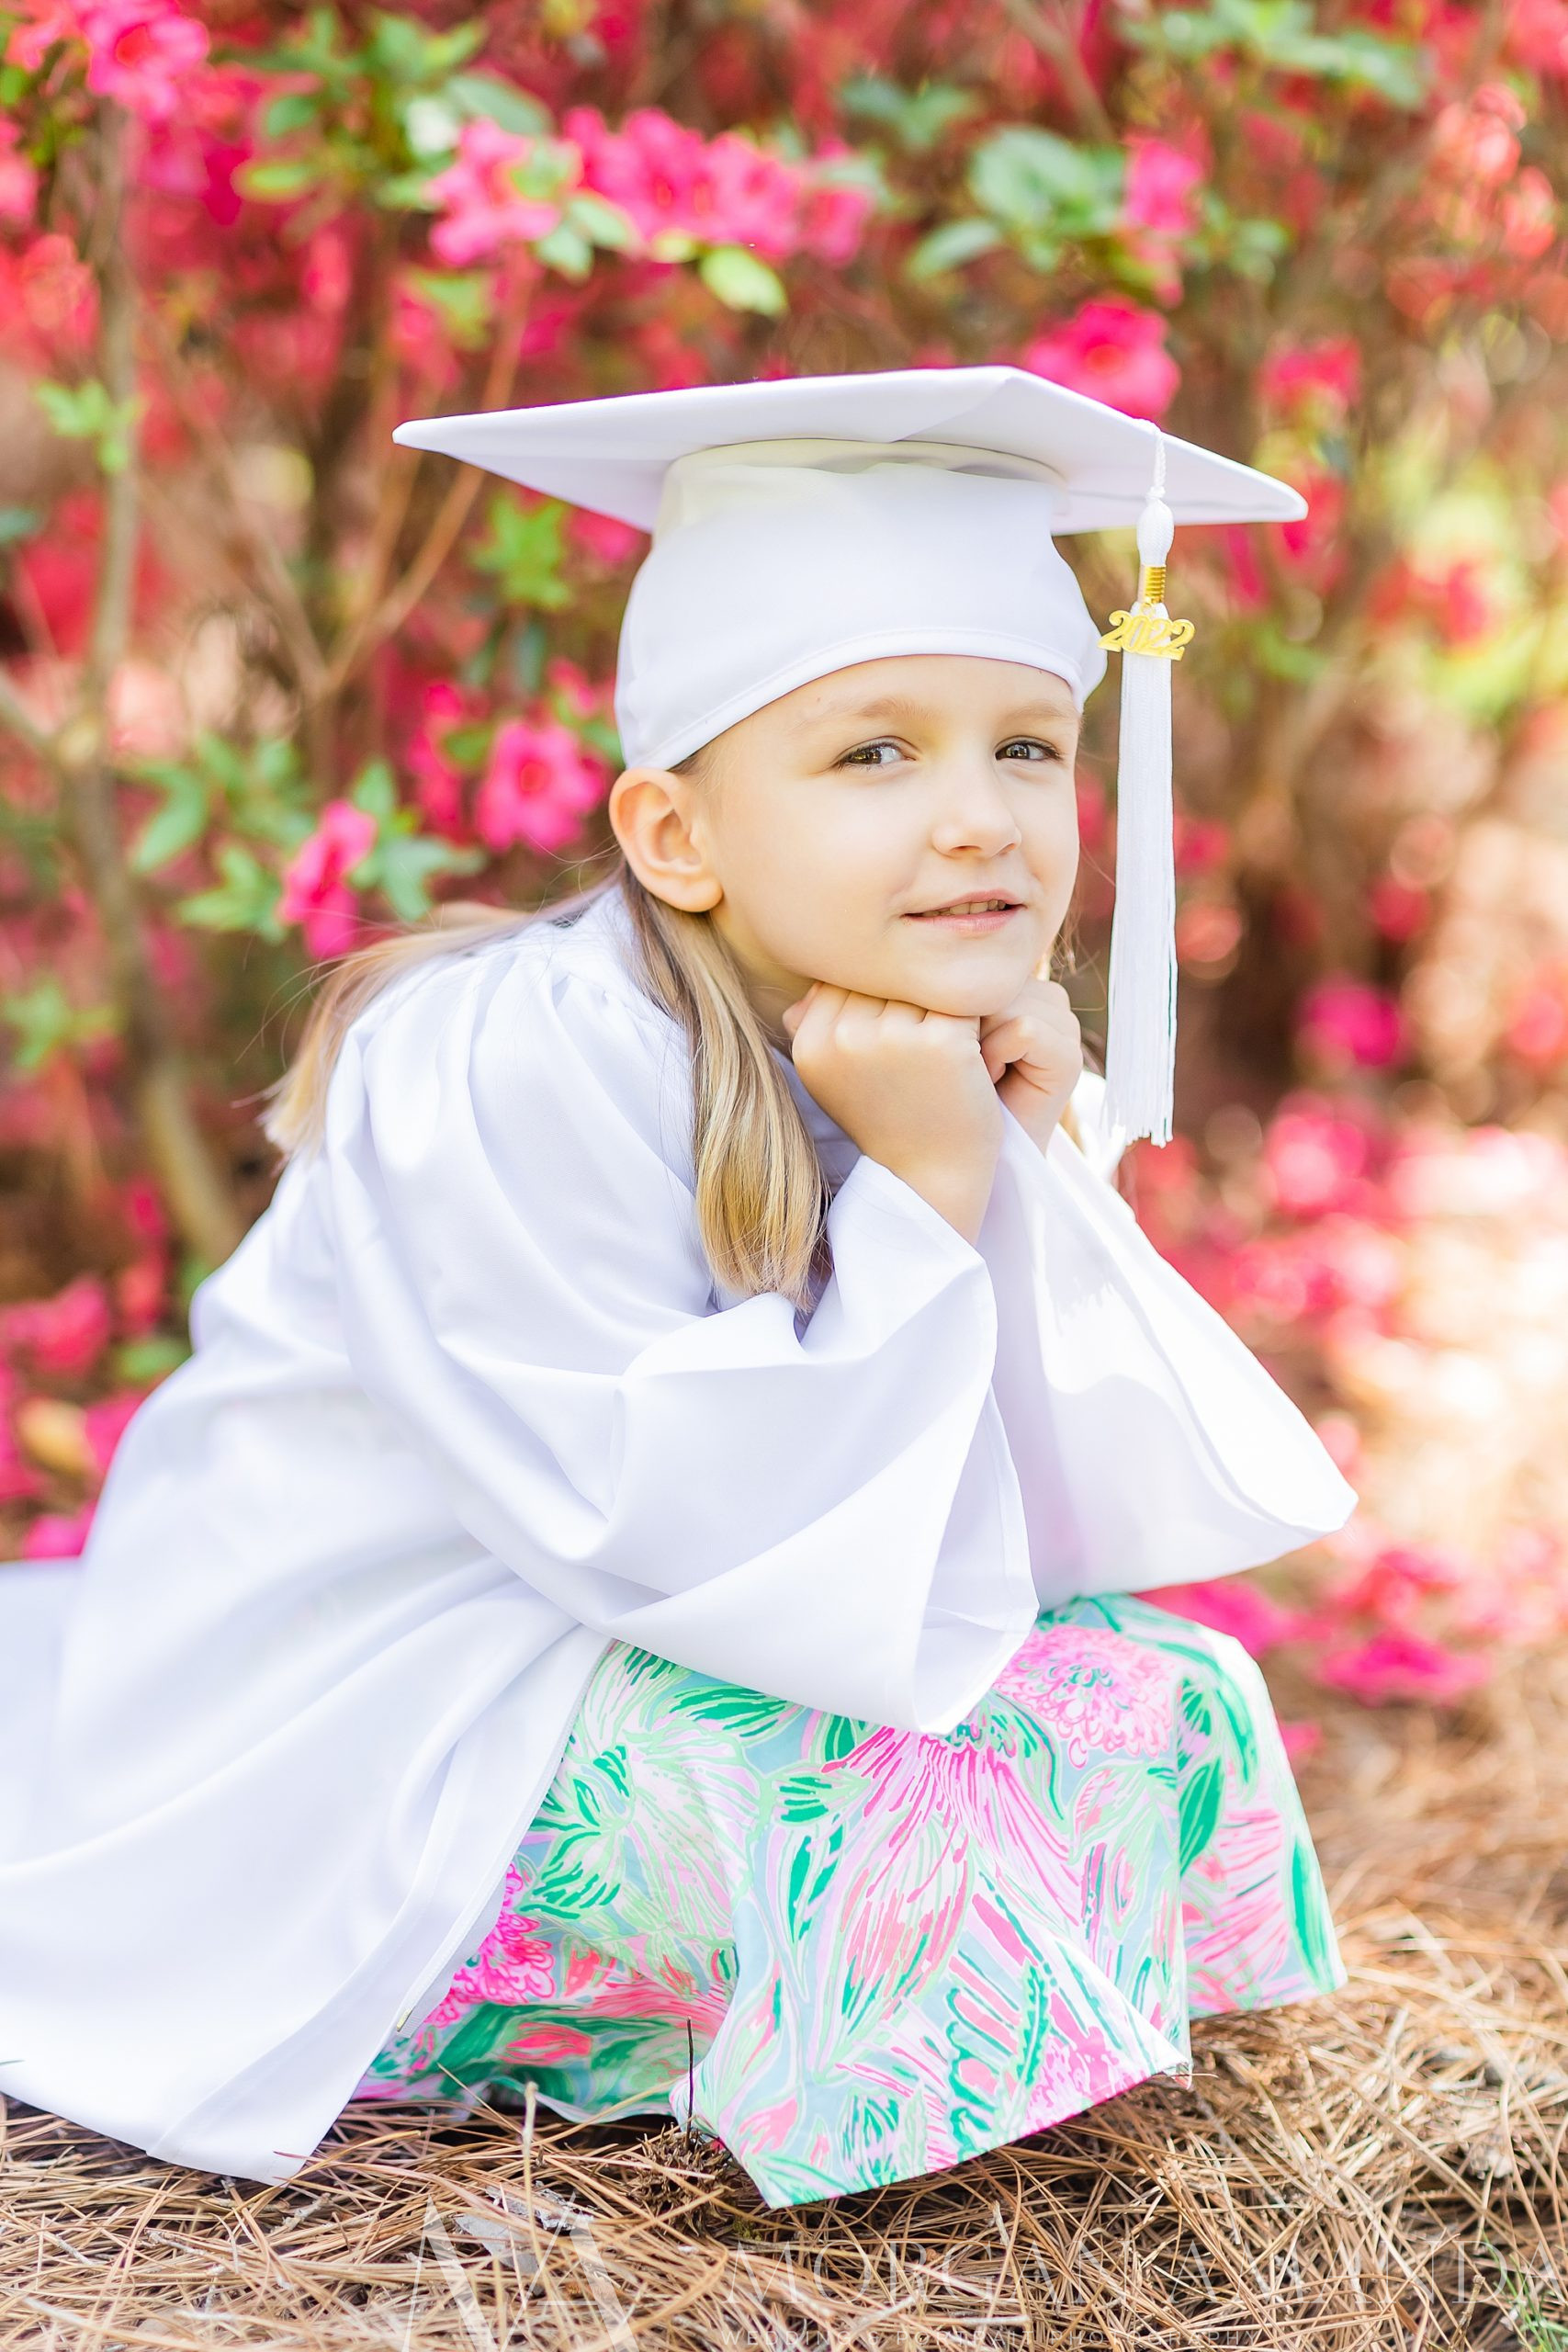 kindergartner sits with hands on knees in white cap and gown